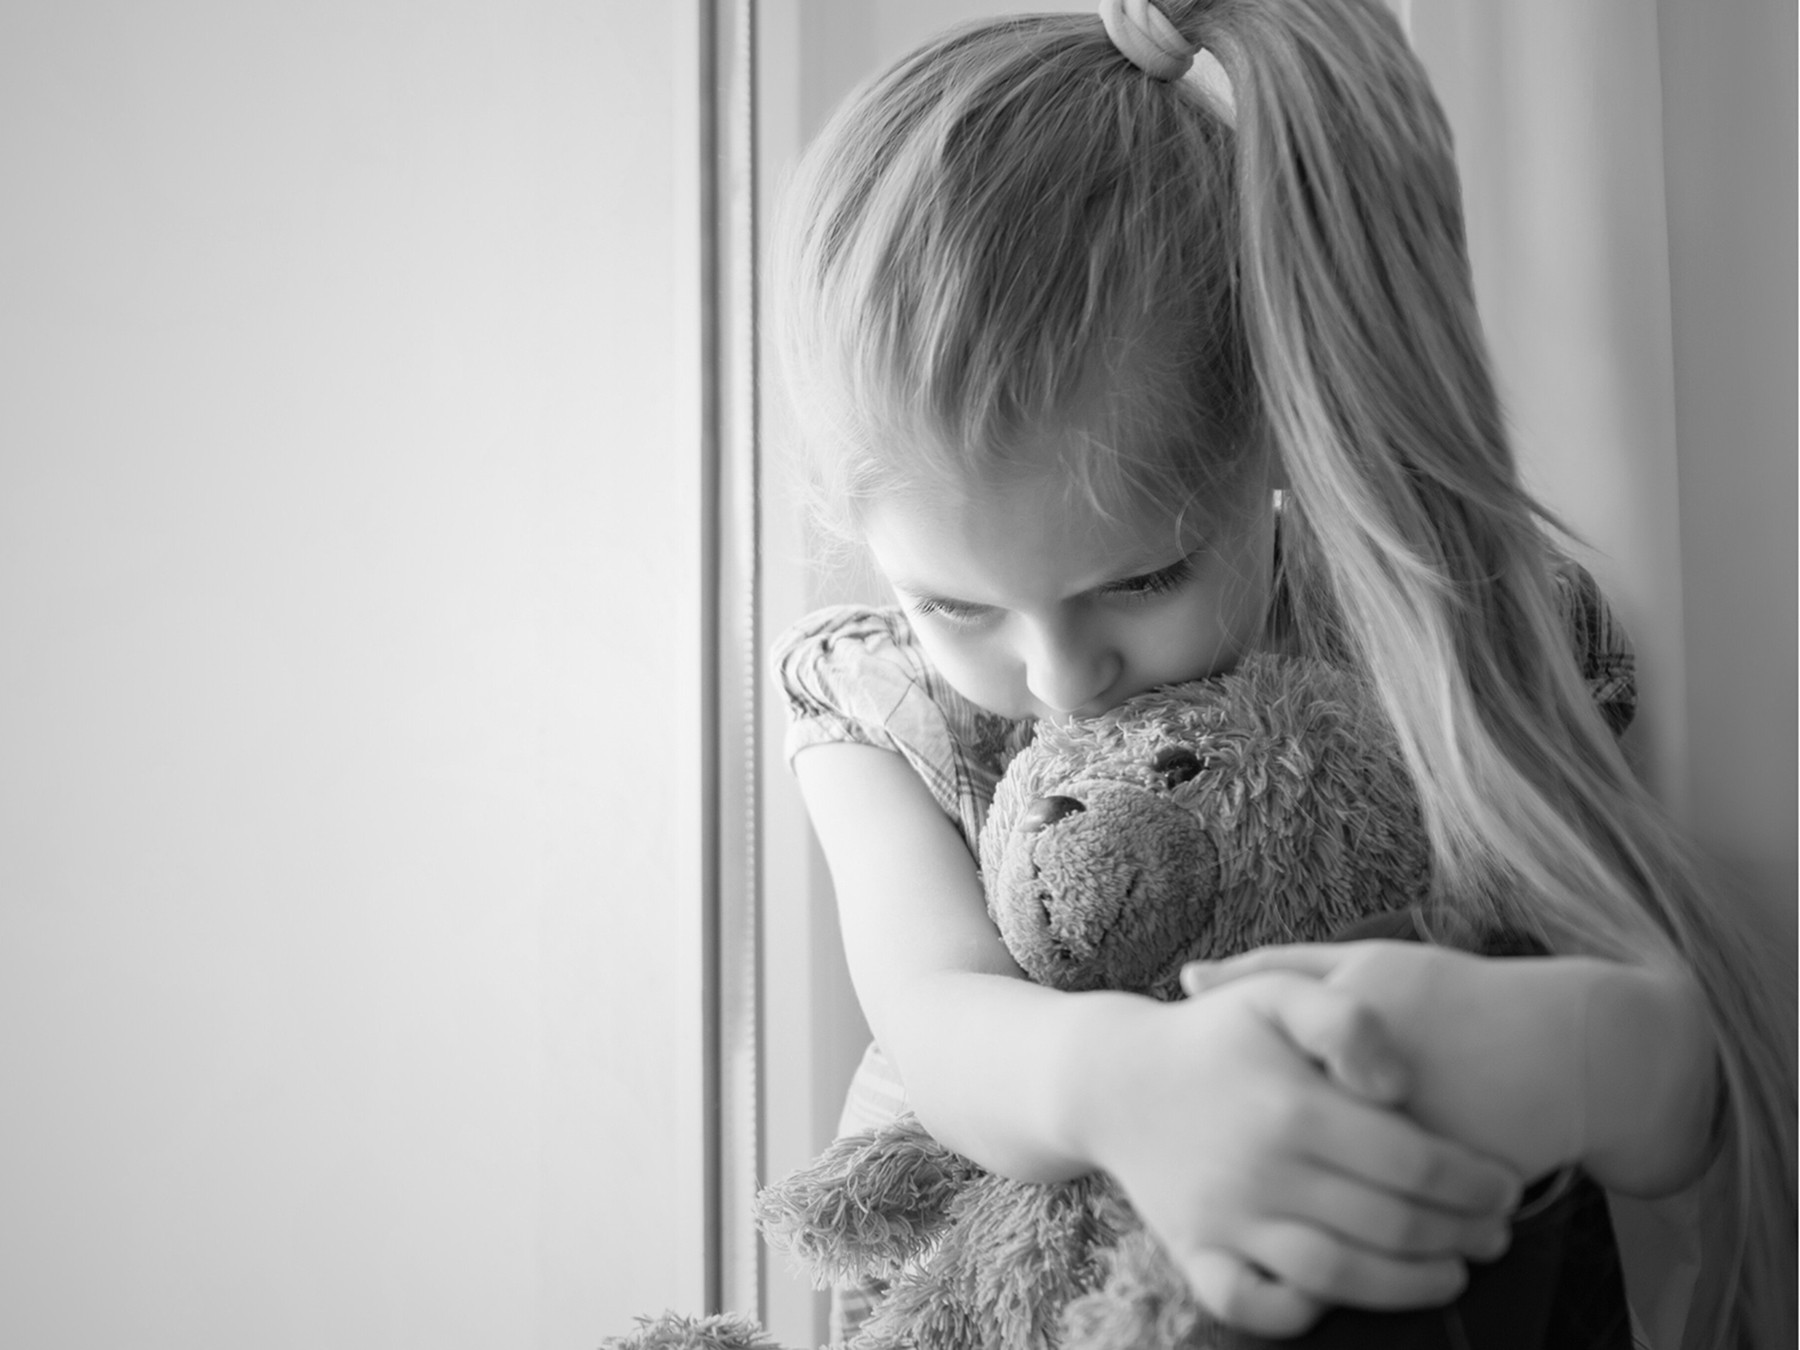 A young girl sits with stuffed teddy bear.